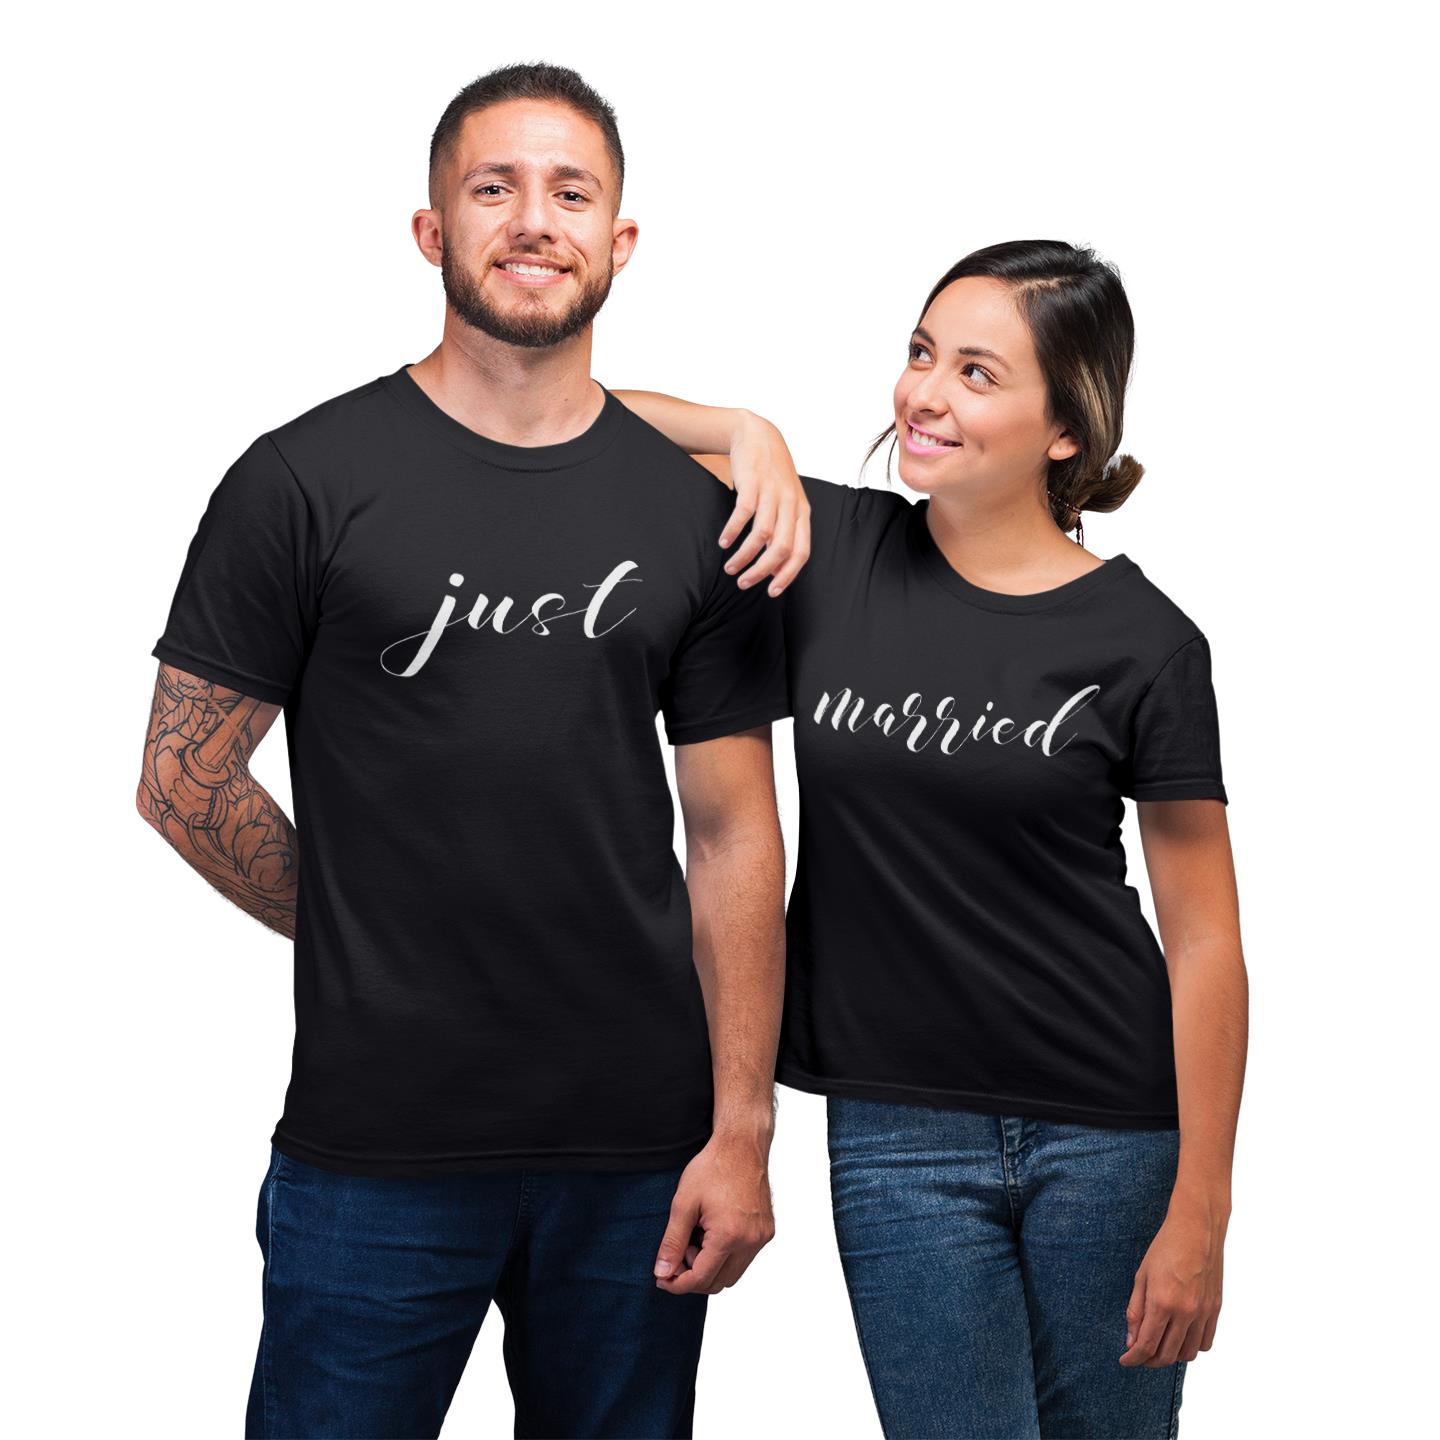 Matching For Pre Wedding Couple Just Married For Newlyweds Mr and Mrs Matchy T-shirt